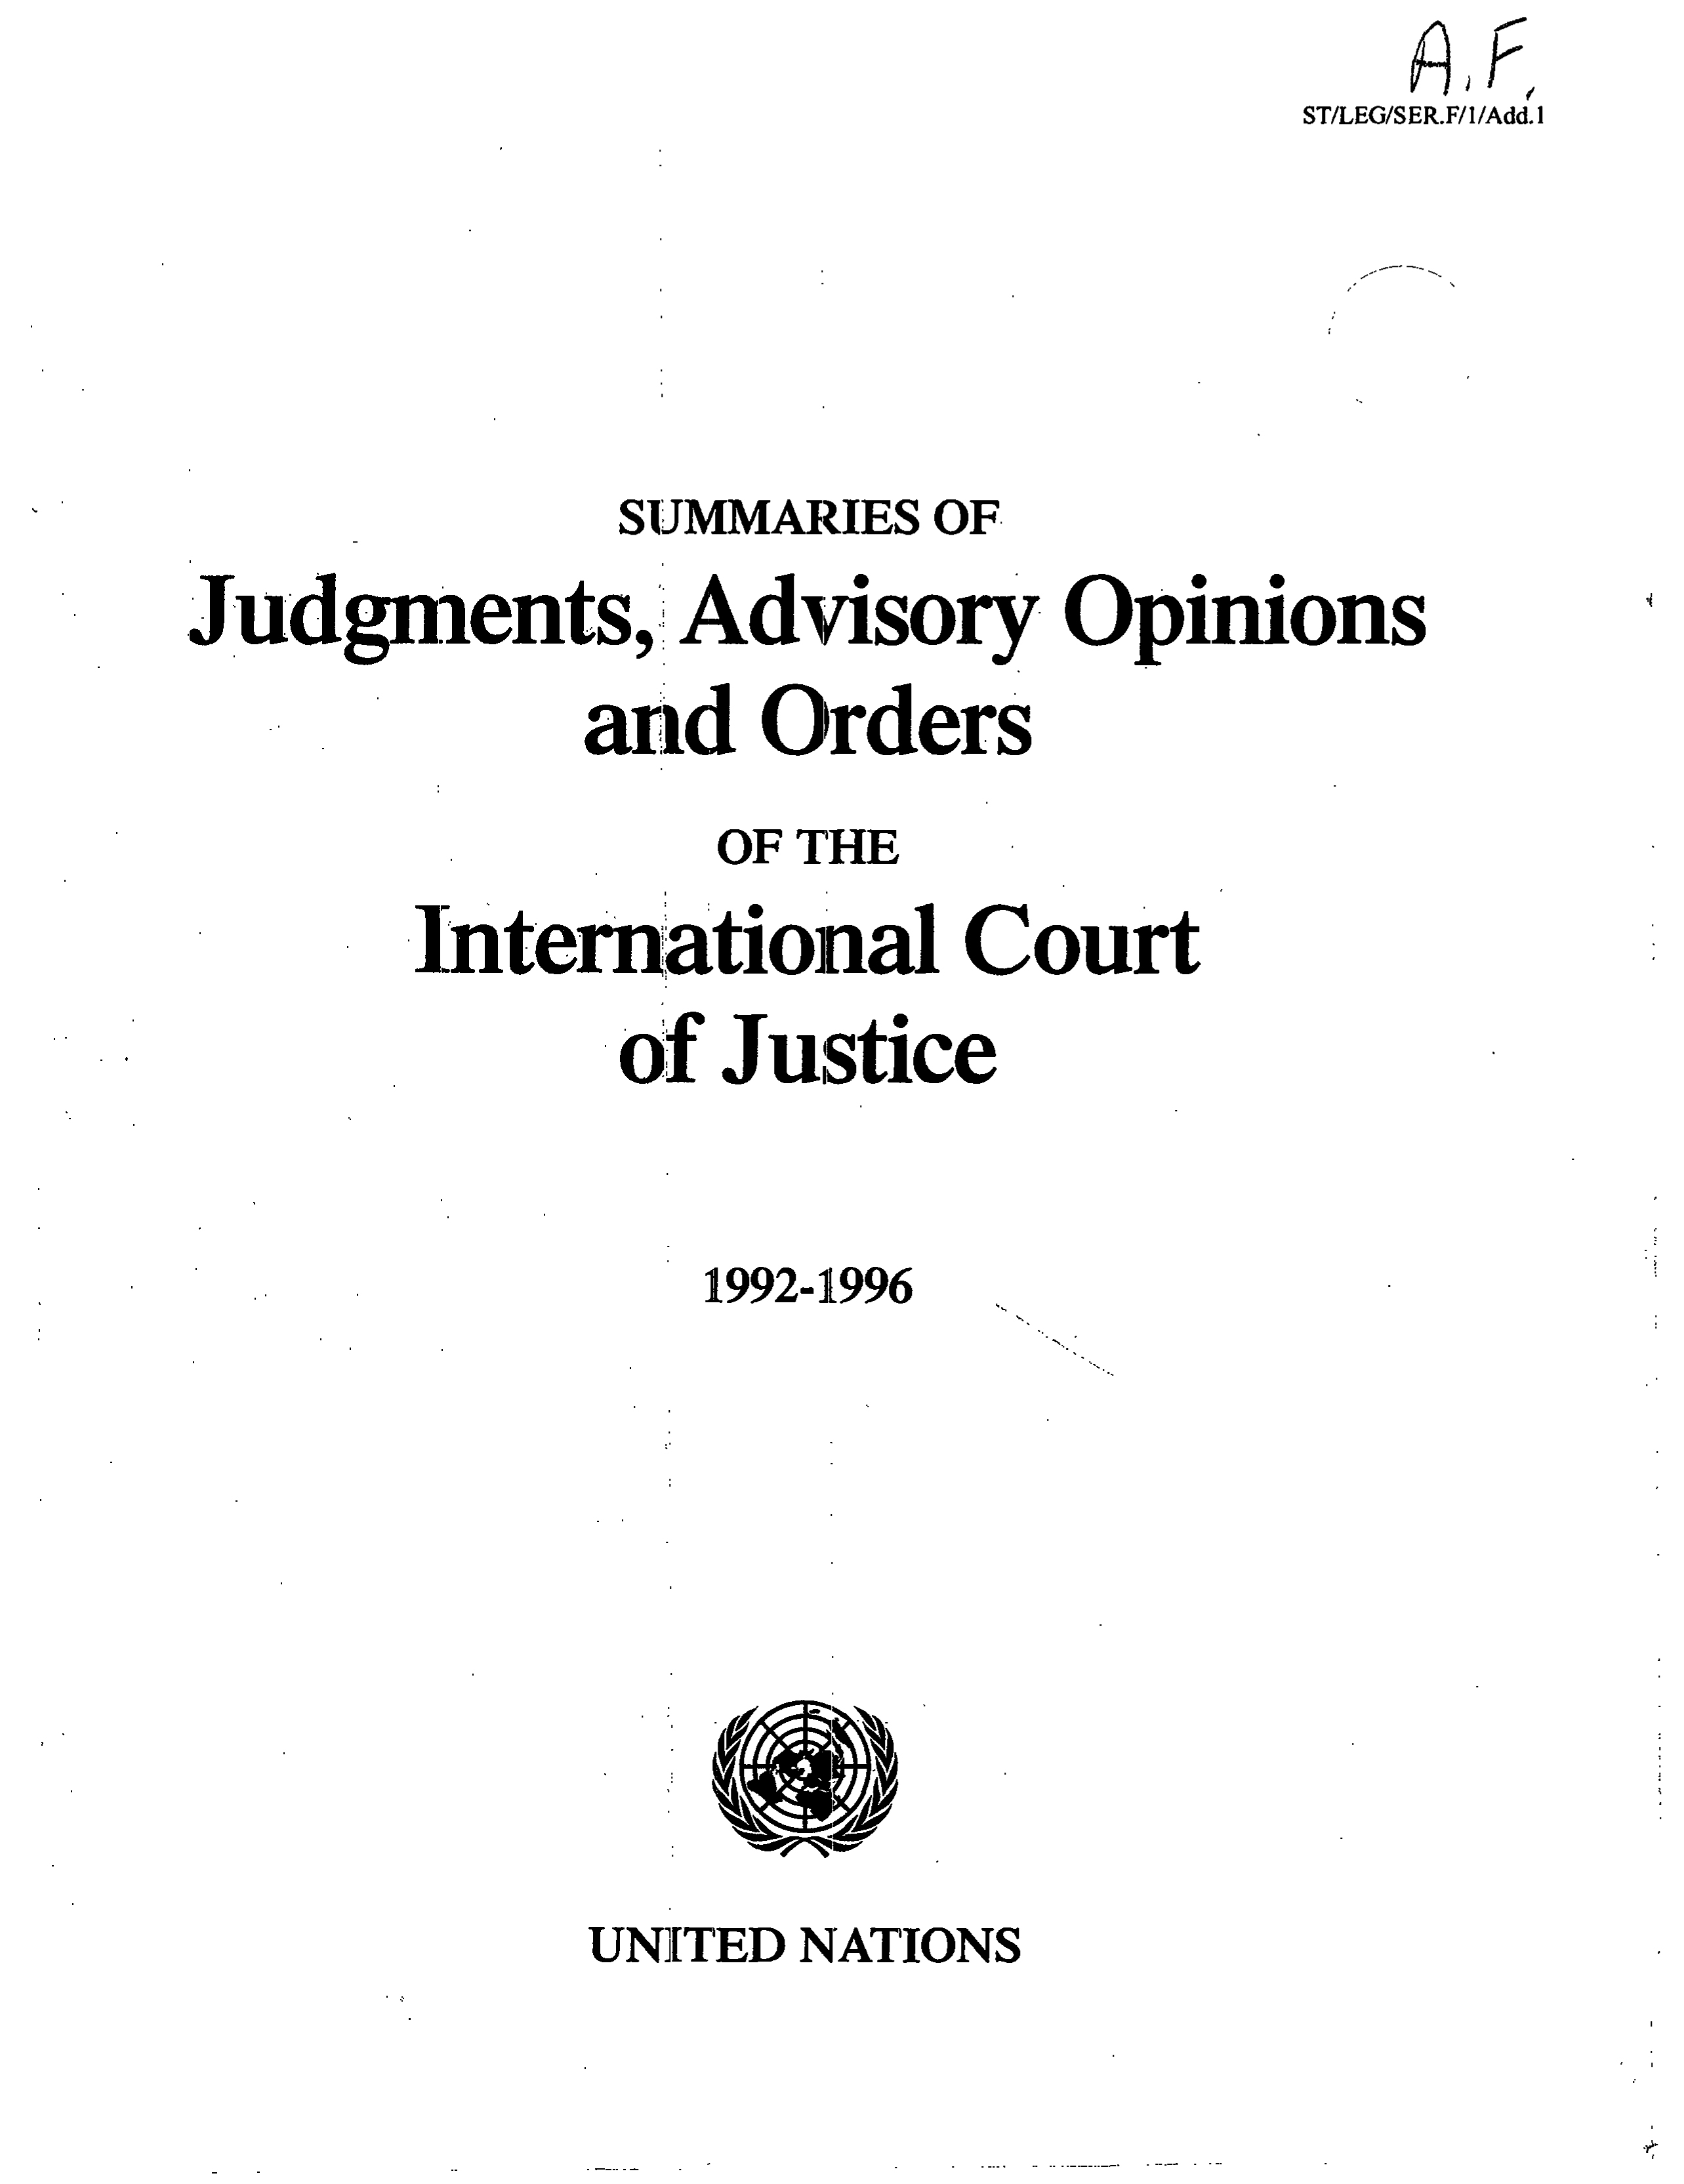 image of Summaries of Judgments, Advisory Opinions and Orders of the International Court of Justice 1992-1996